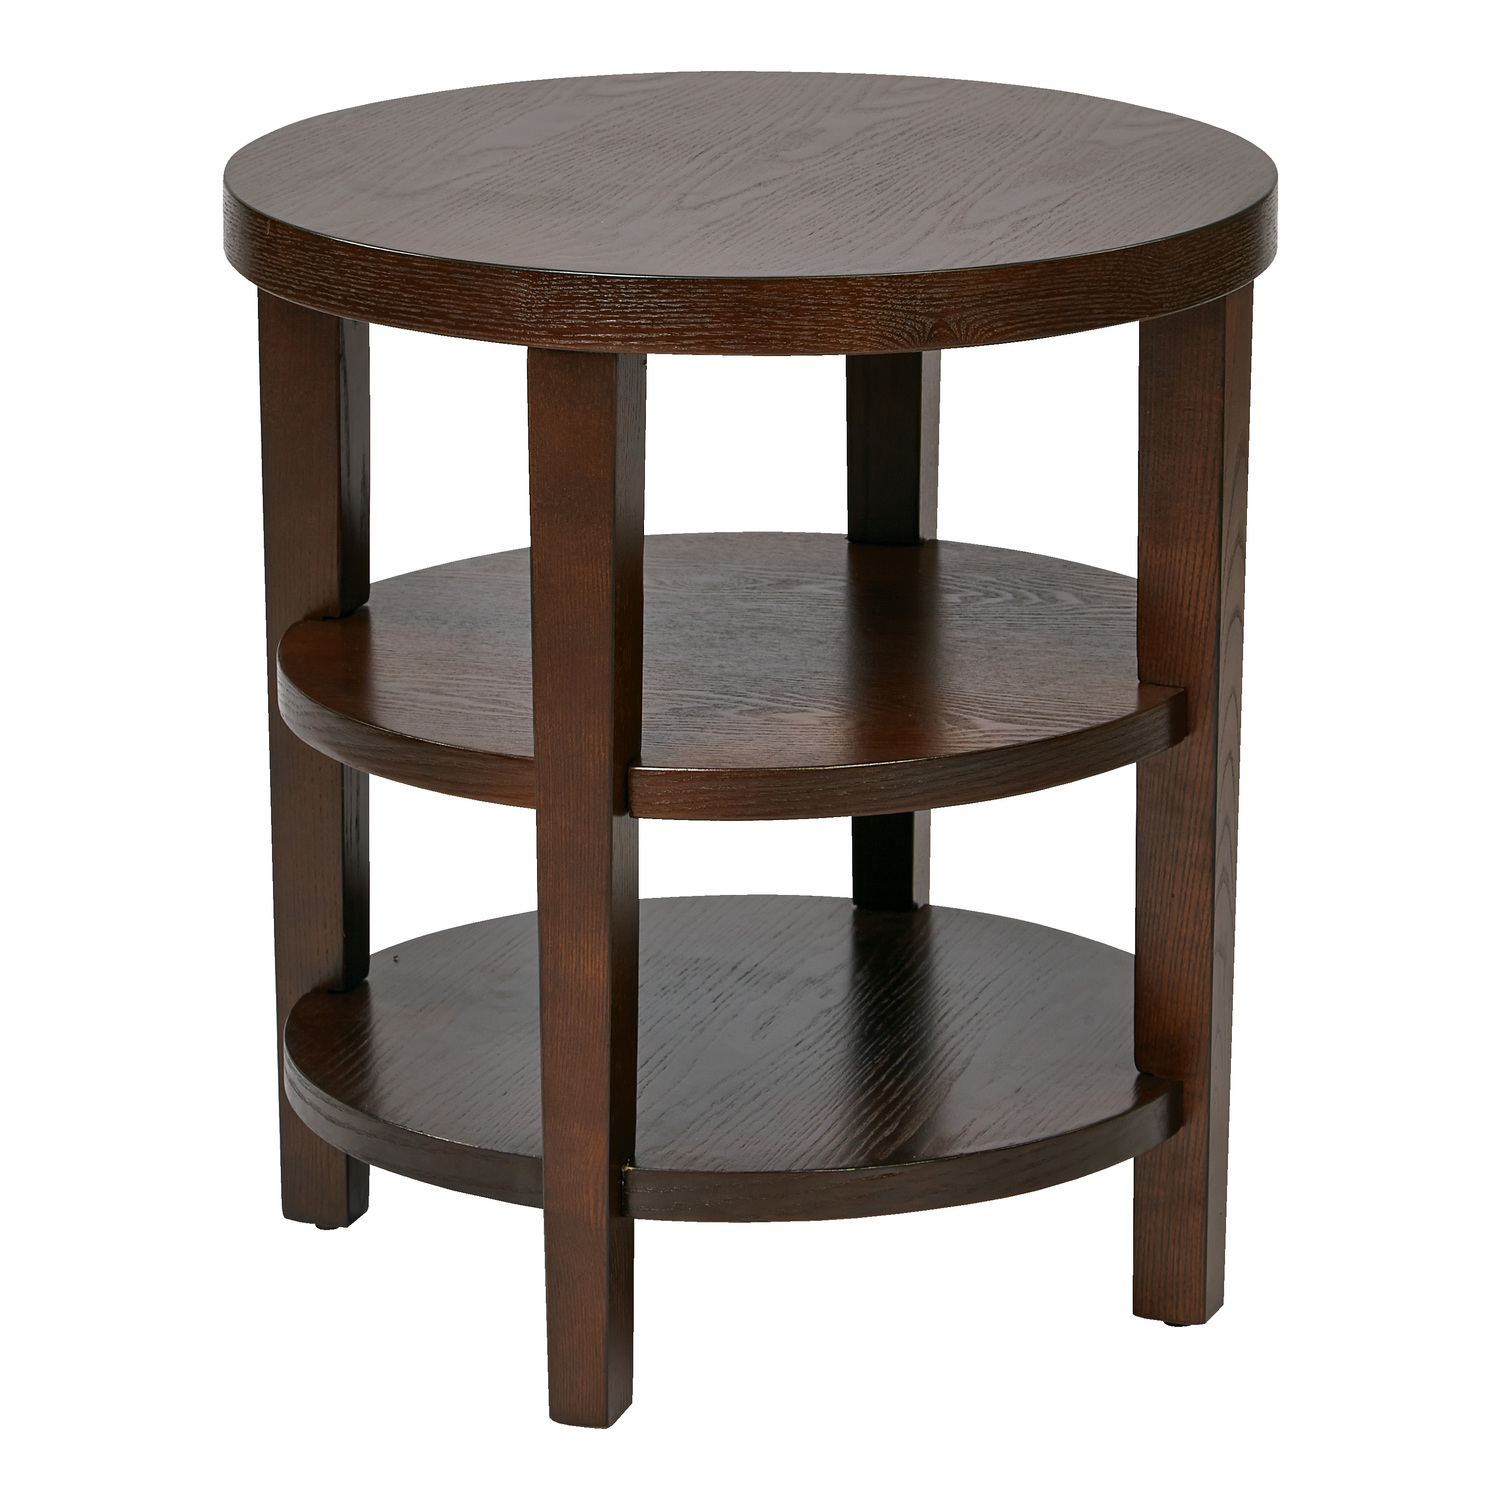 OSP Home Furnishings Work Smart Merge 20" Round End Table (Espresso) - image 1 of 2